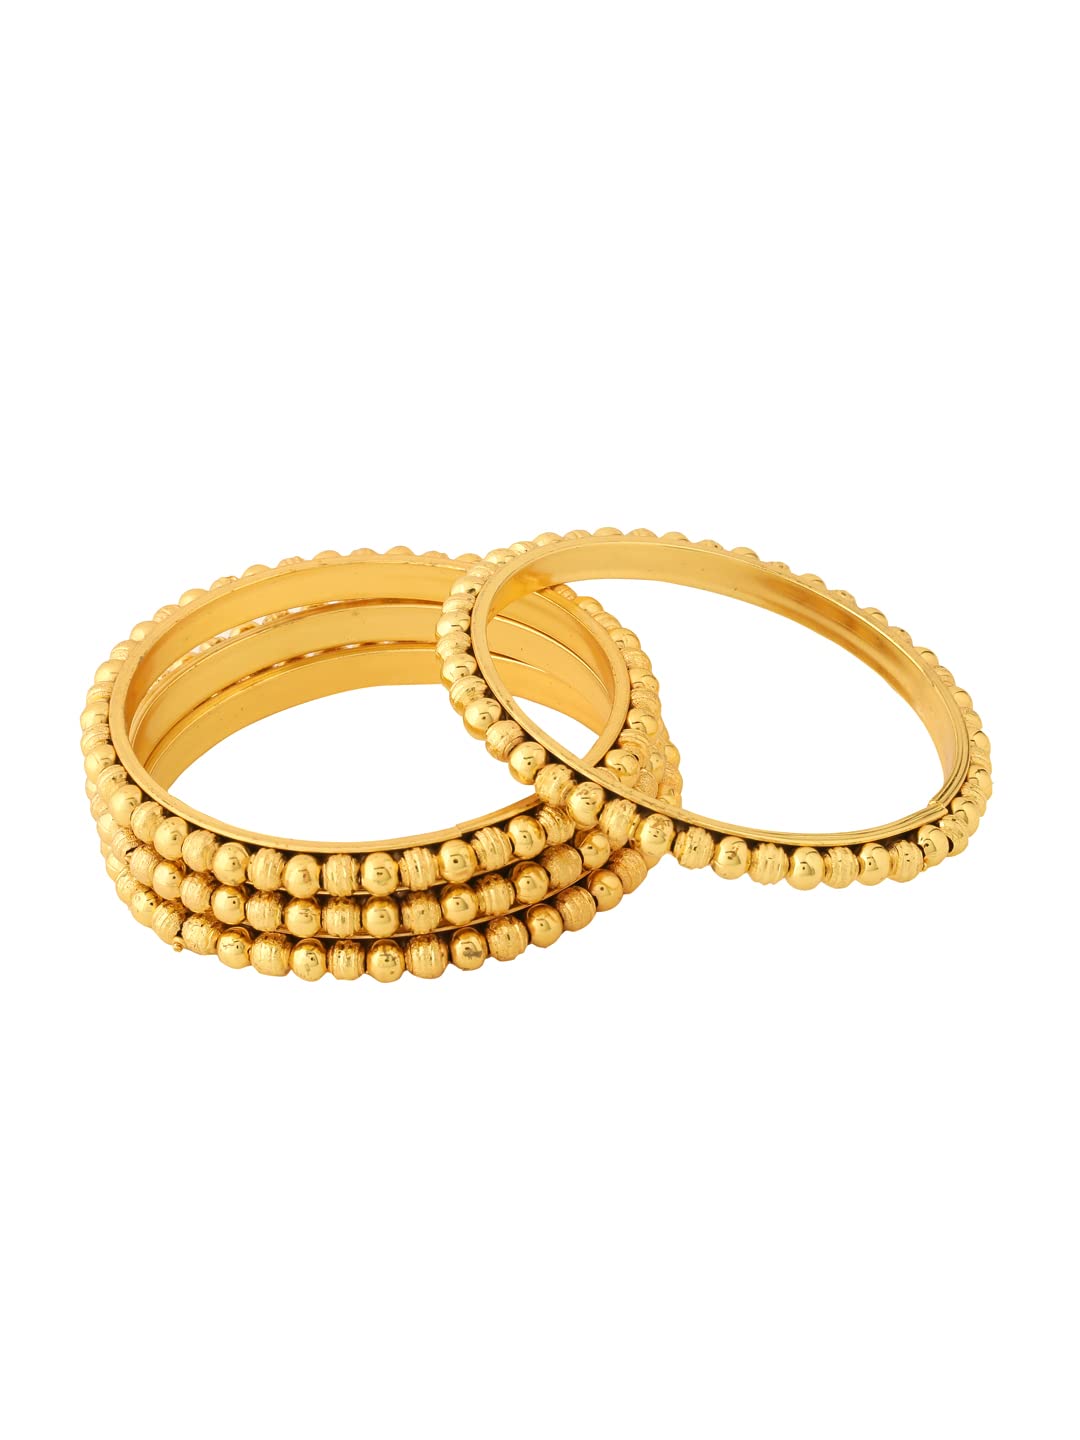 Yellow Chimes Bangles for Women Gold Toned Beads Designed Set of 4 Pcs Traditional Bangles for Women and Girls